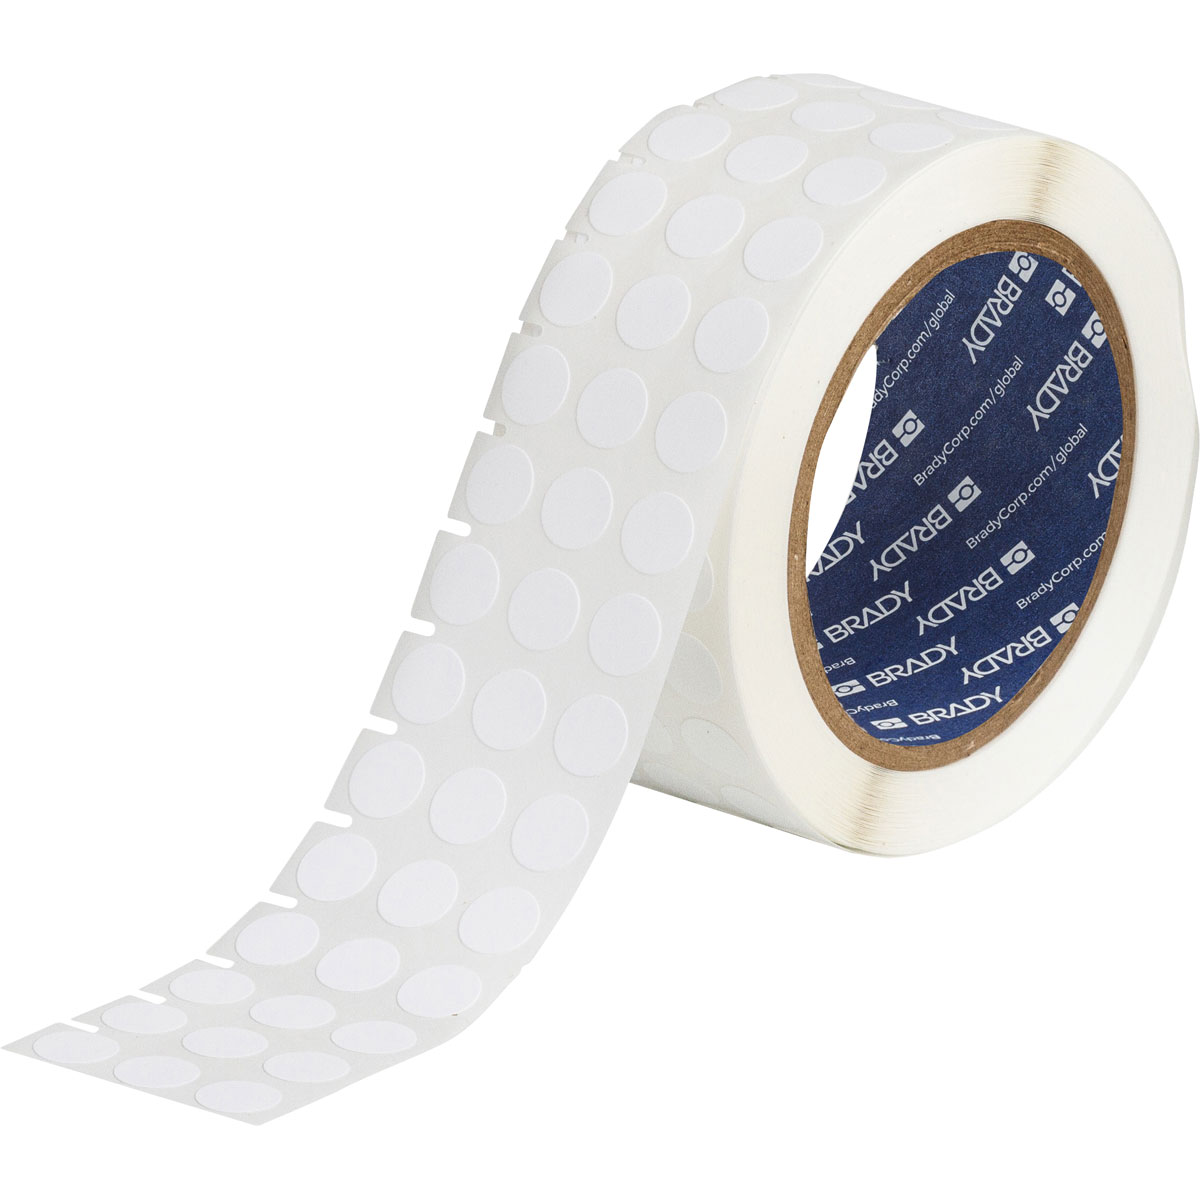 Brady M71-84-499 Nylon Cloth BMP71 Labels White 500 Labels per Roll, 1 Roll per Package